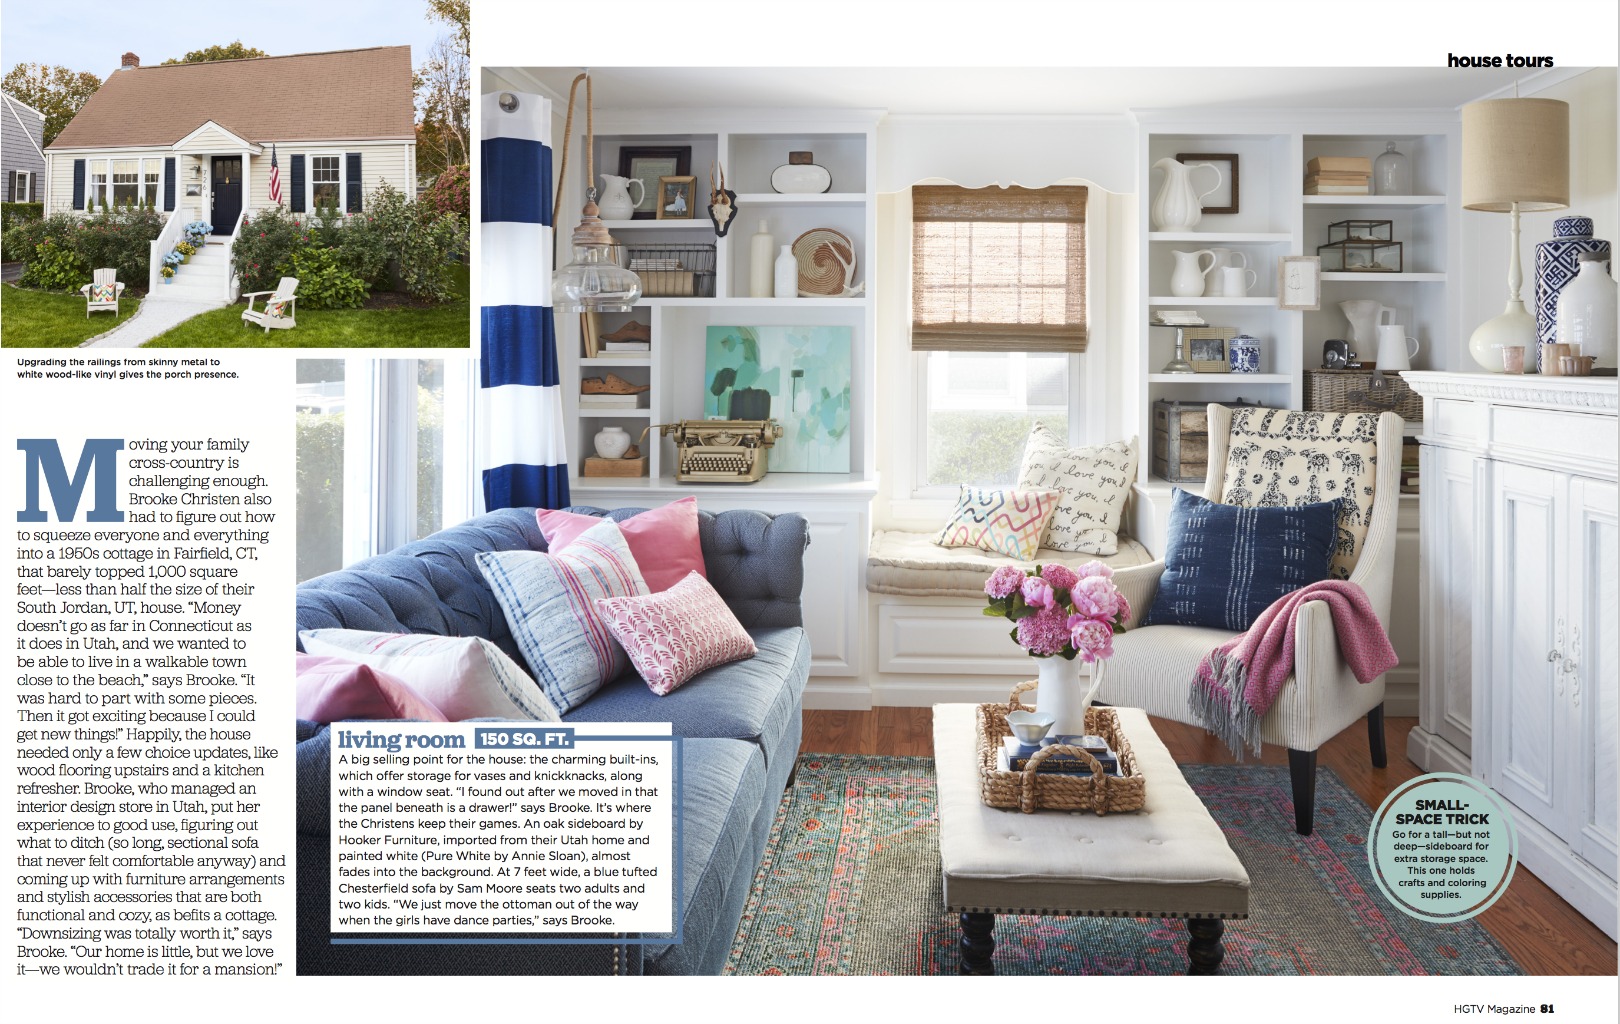 1100 Square Feet HGTV Magazine Feature- Then and NOW!